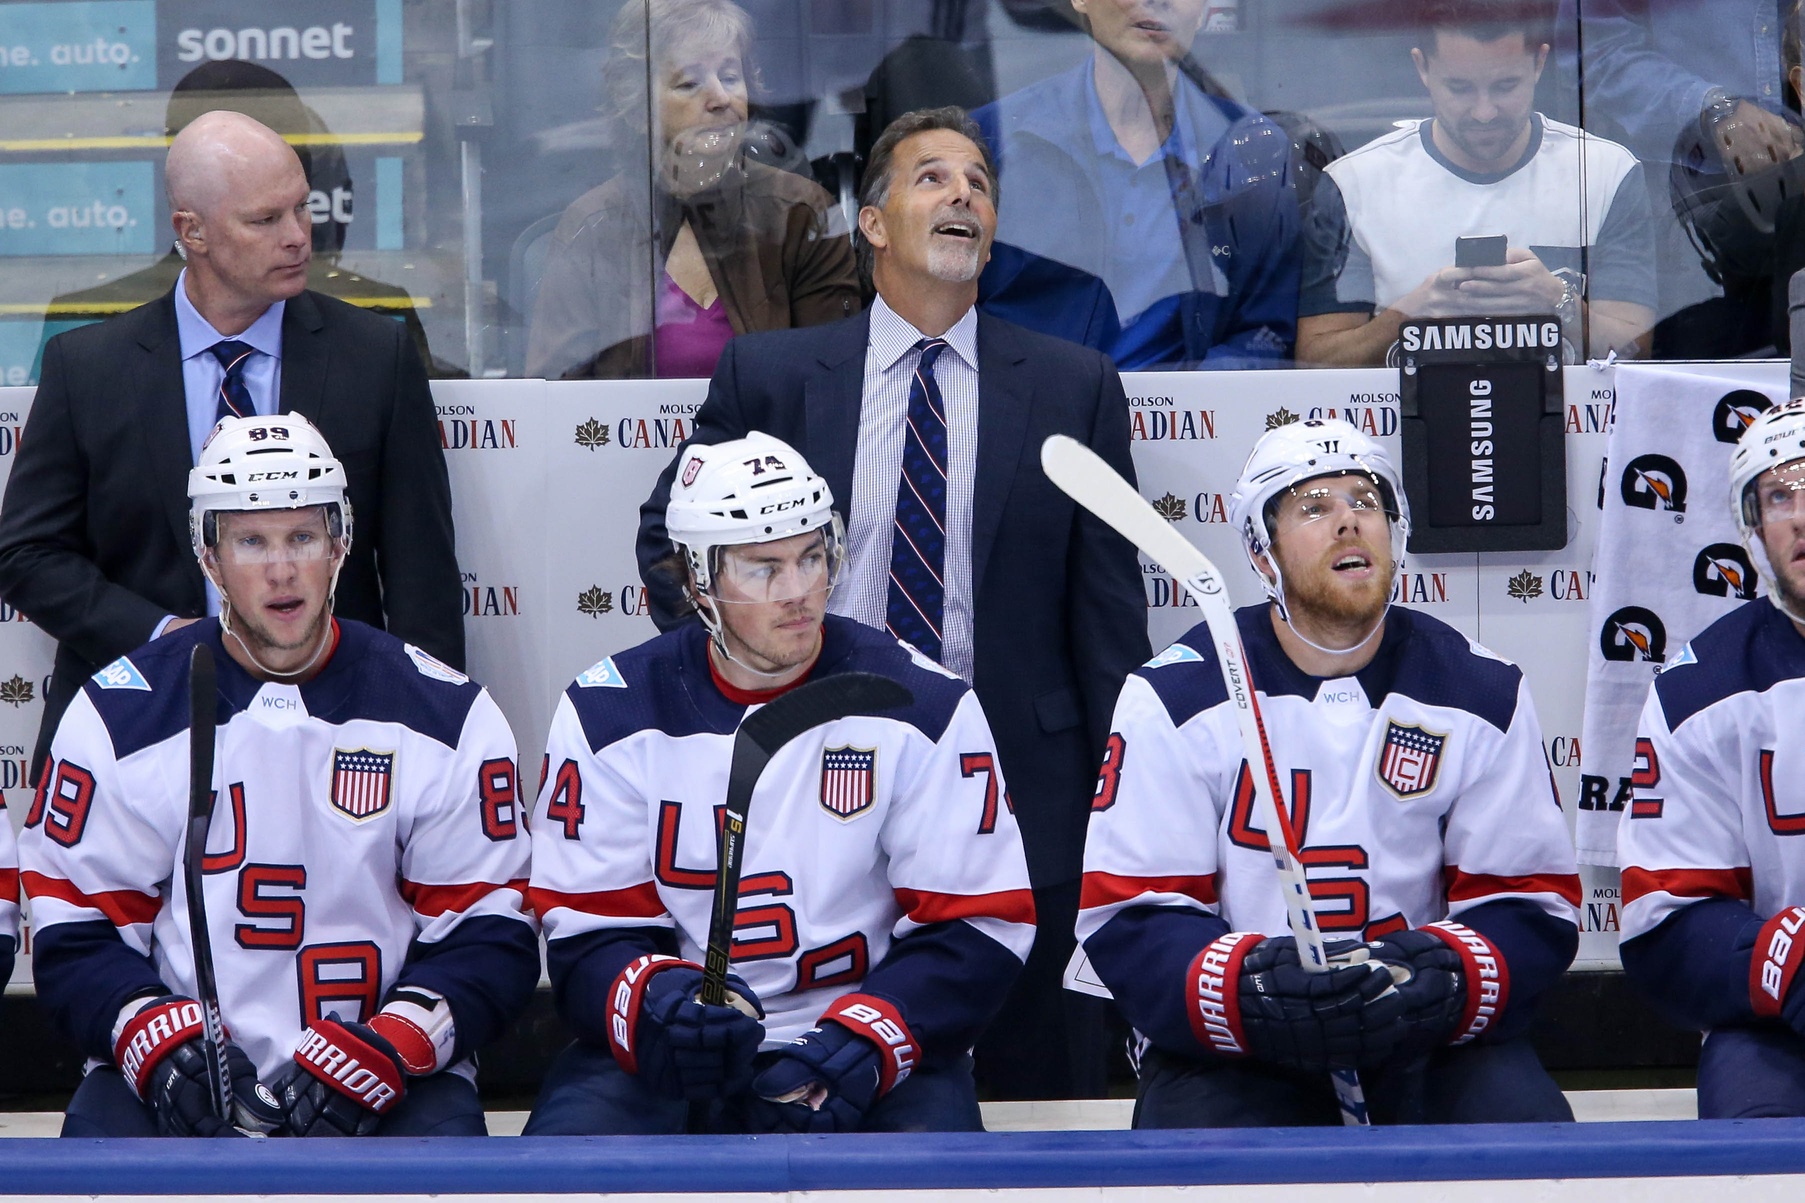 Filed under "things to be criticized": John Tortorella's decision-making.